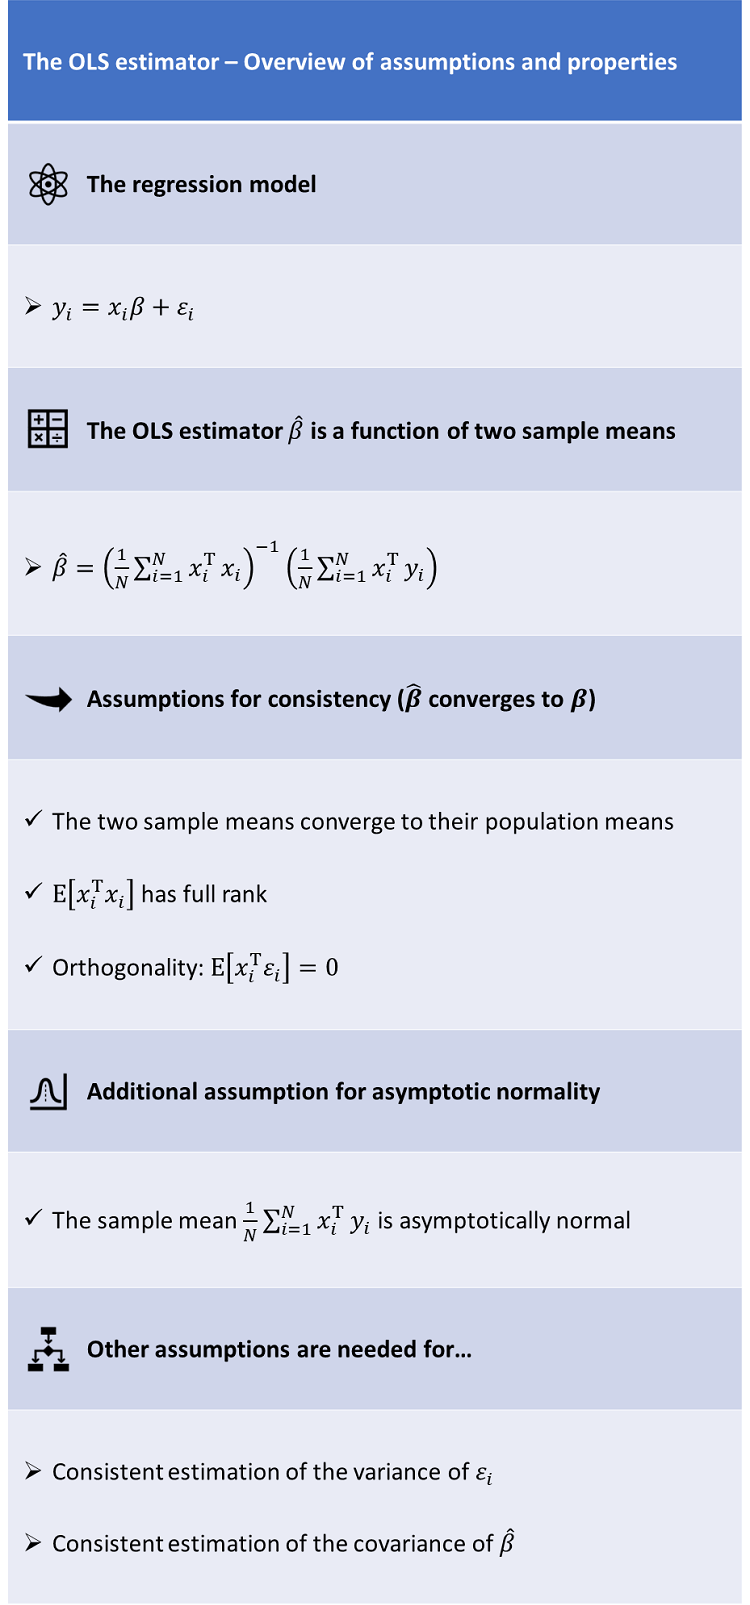 Infographic providing an overview of the assumptions needed to prove the consistency and asymptotic normality of the OLS estimator.